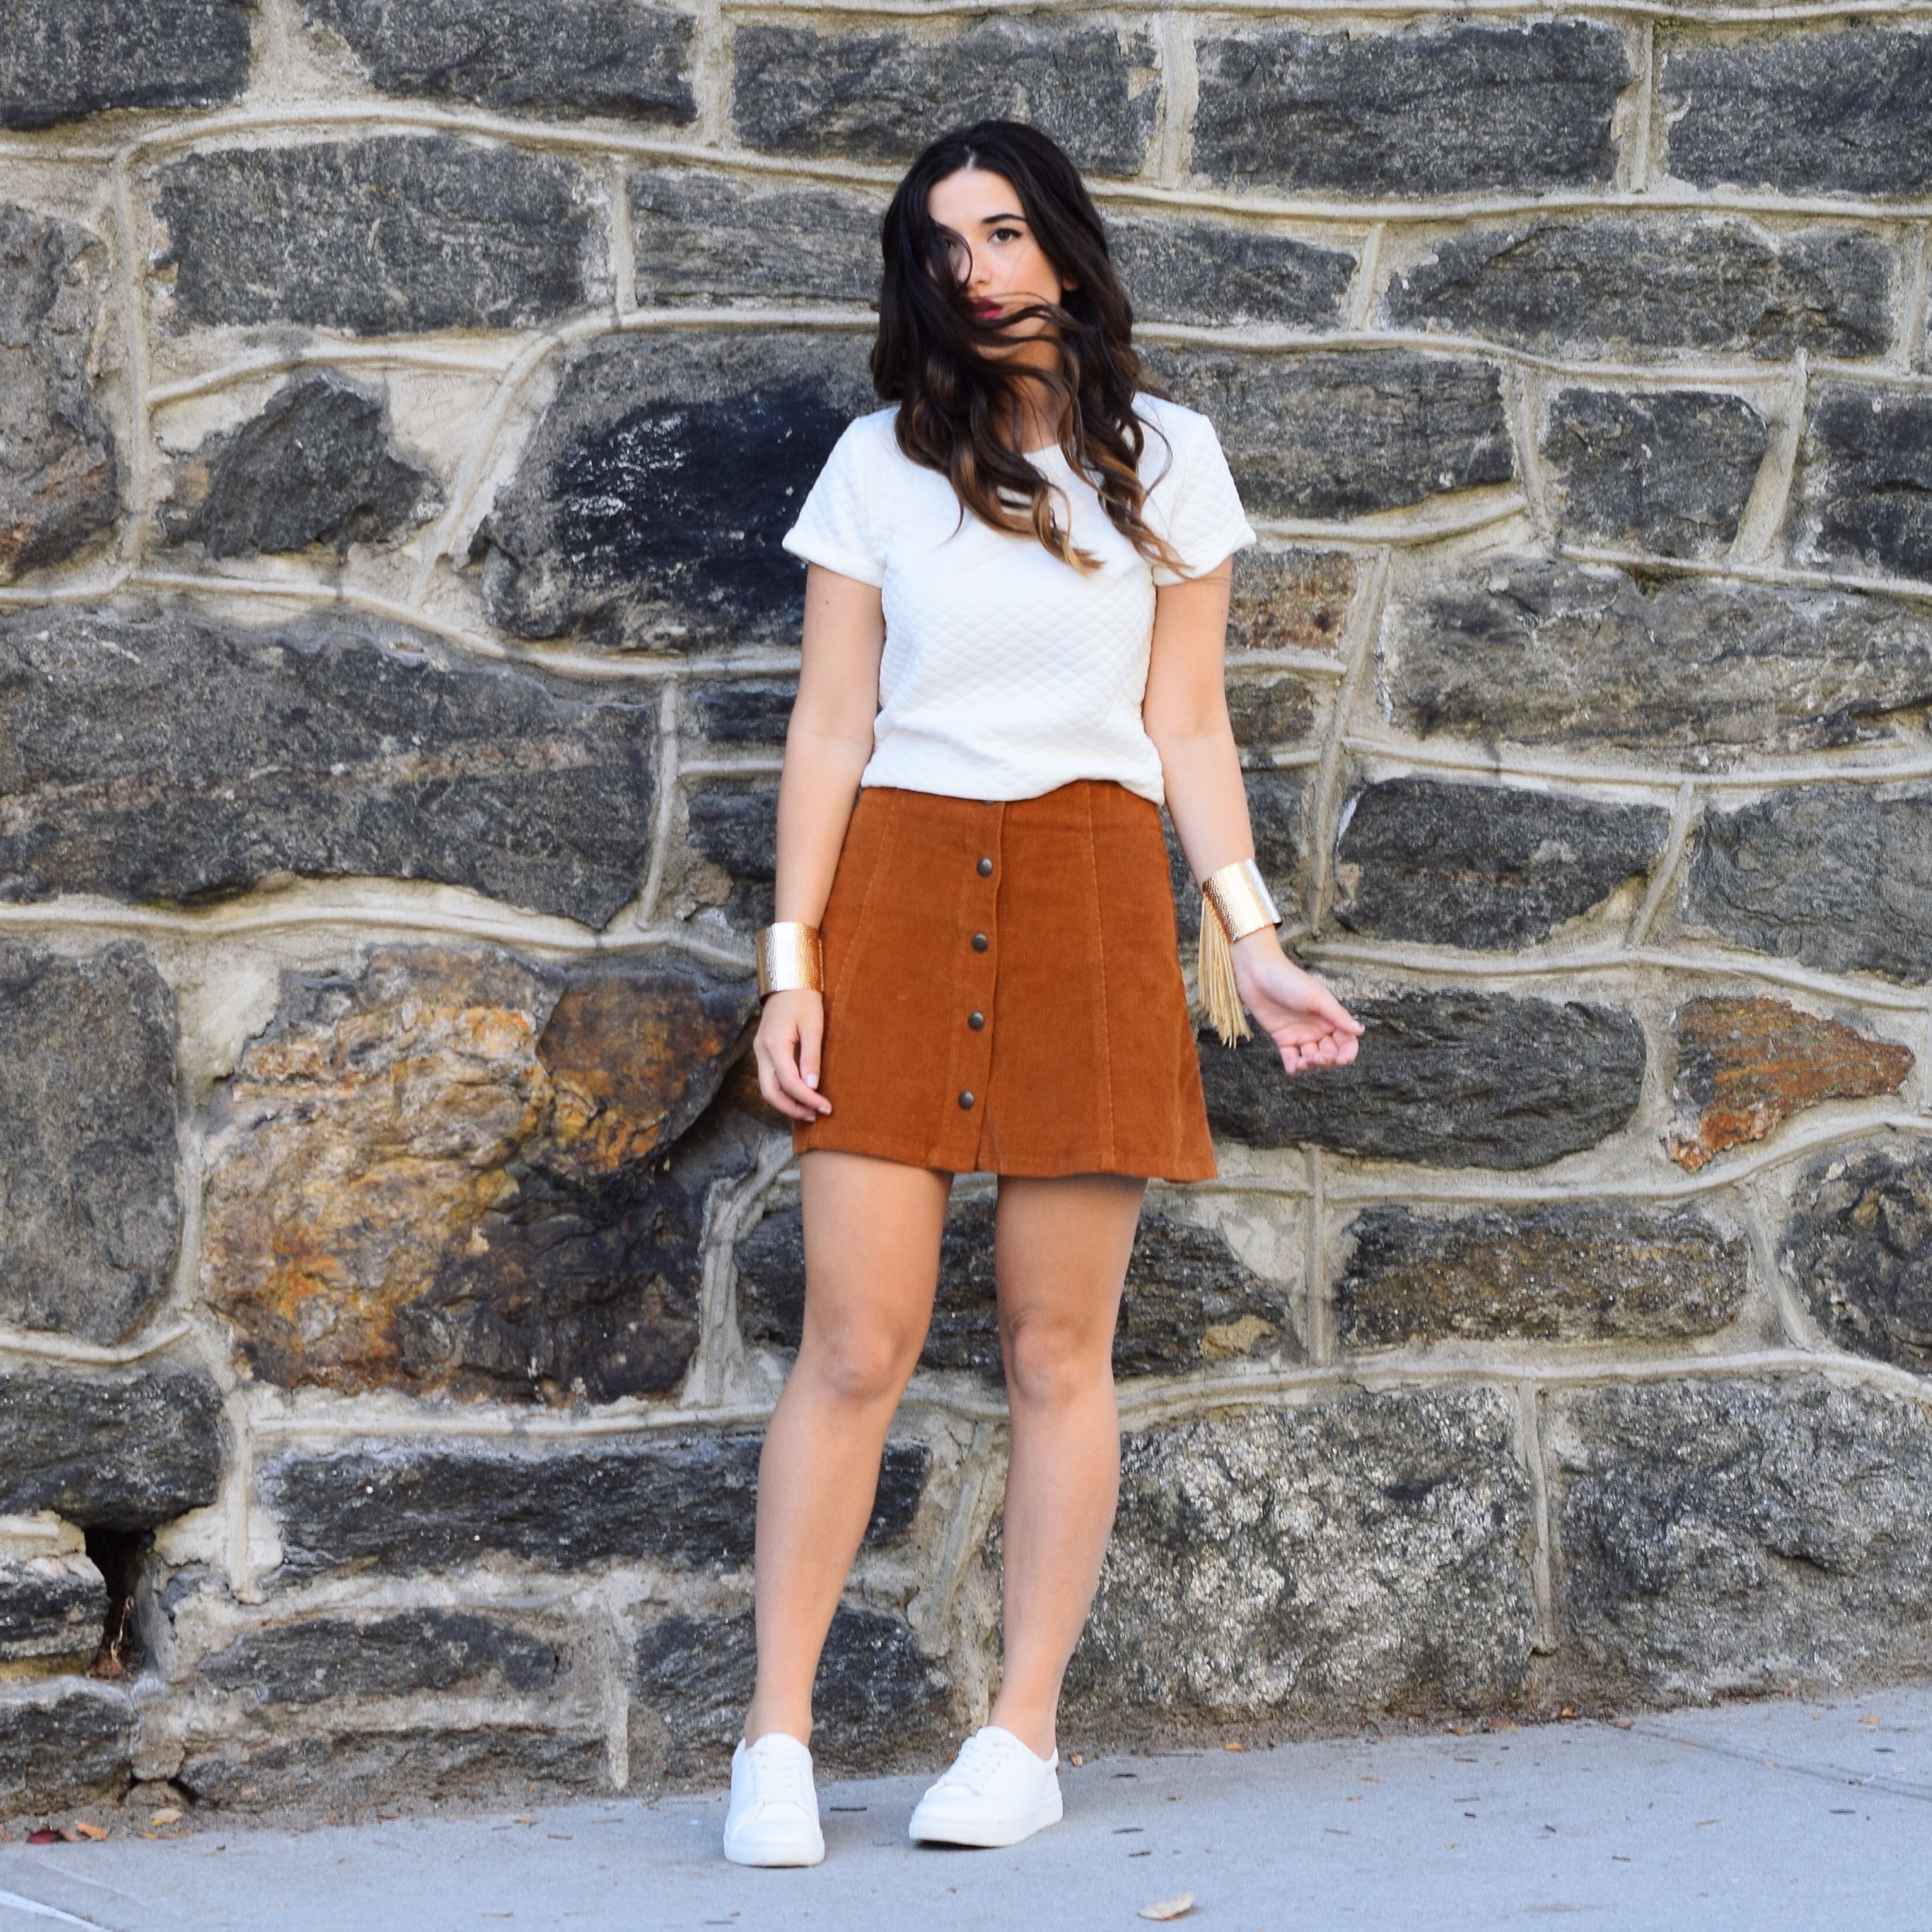 Pelle.NYC Gold Fringed Cuffs Giveaway Louboutins & Love Fashion Blog Esther Santer Street Style Blogger NYC Photoshoot Bracelets Topshop White Crop Top Button Front Corduroy Hair Brunette Model Girl Women Trendy Outfit OOTD Look Inspiration Inspo Shop.JPG